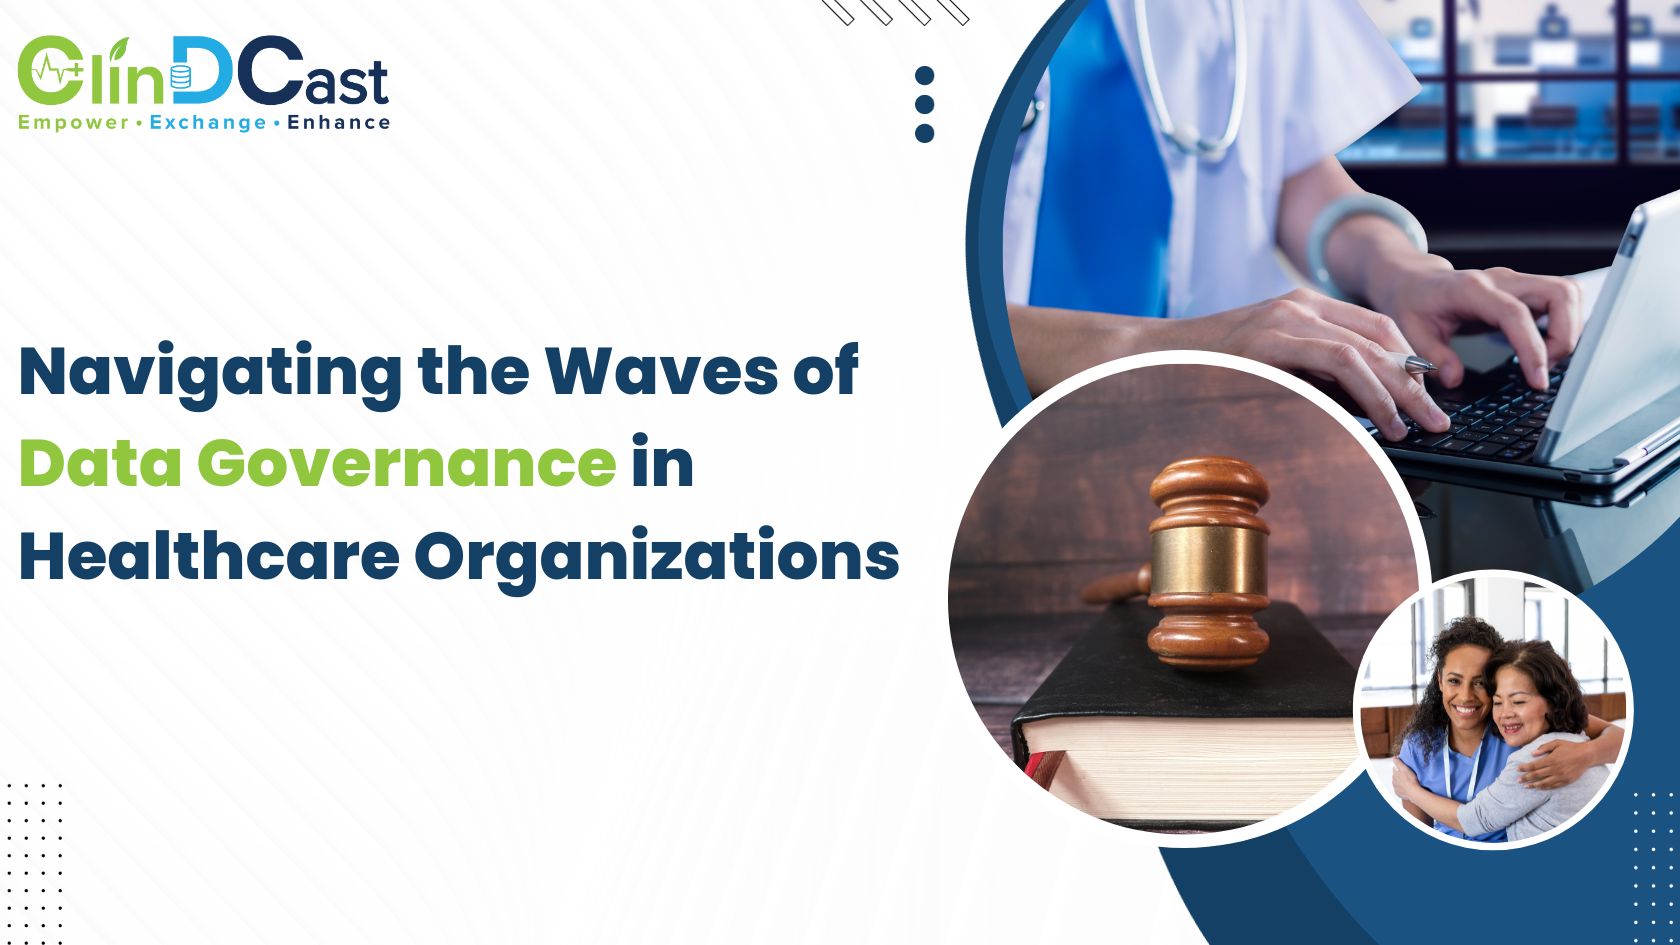 Navigating the Waves of Data Governance in Healthcare Organizations